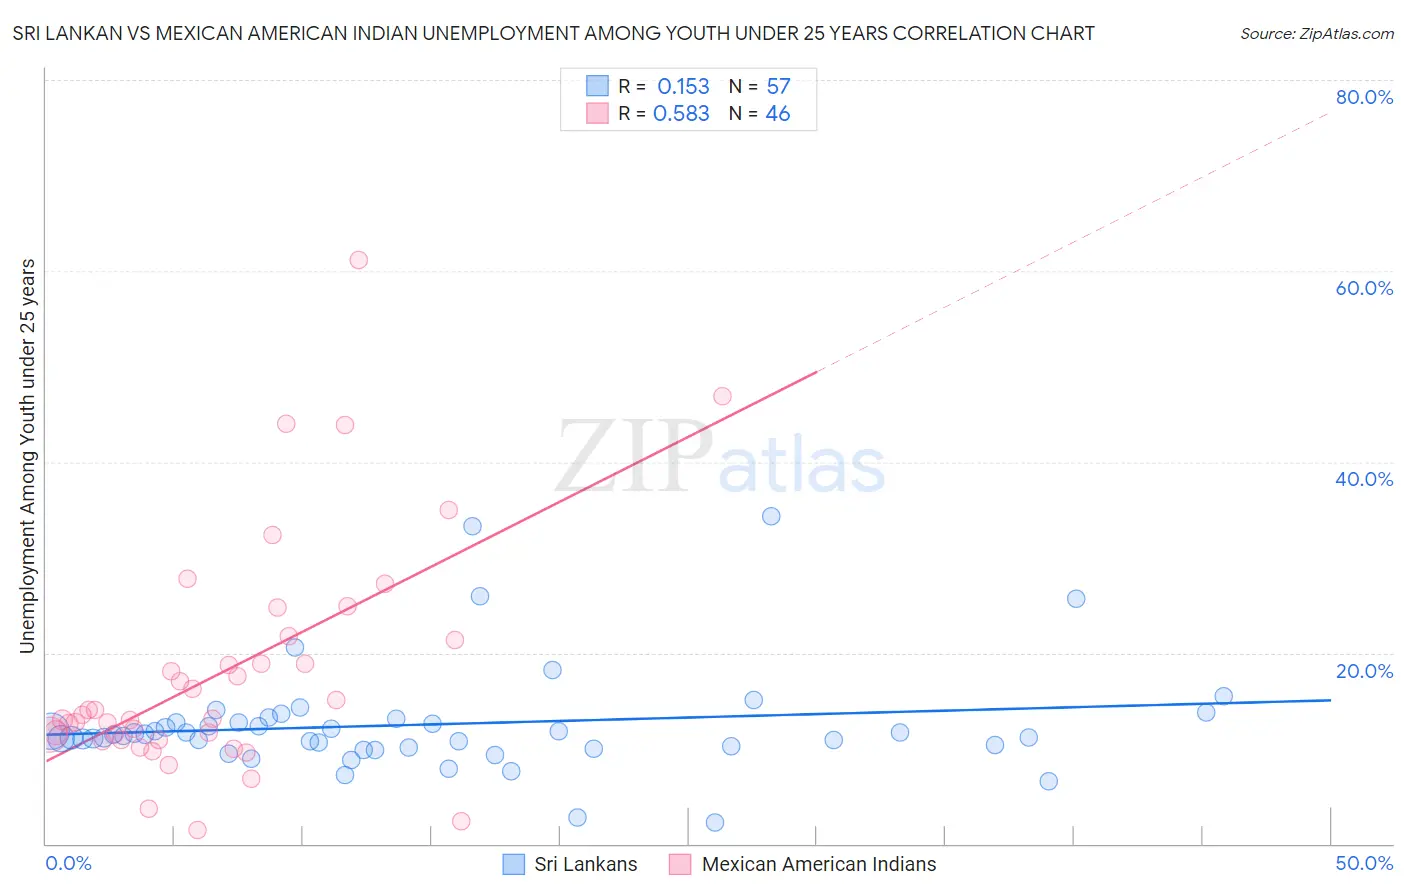 Sri Lankan vs Mexican American Indian Unemployment Among Youth under 25 years